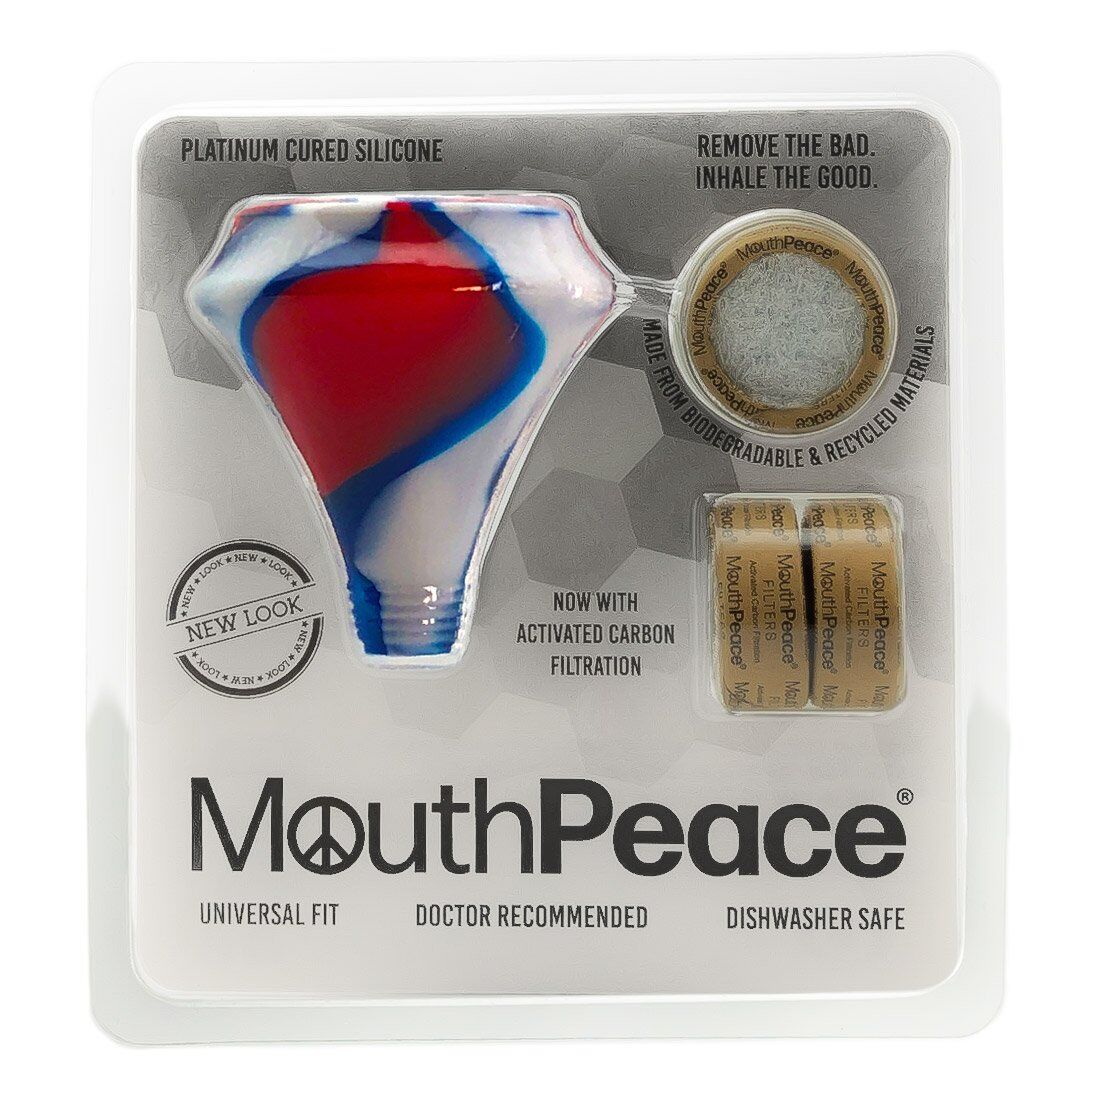 Medible review red white blue mouthpeace filters silicone mouthpiece germ free filtered